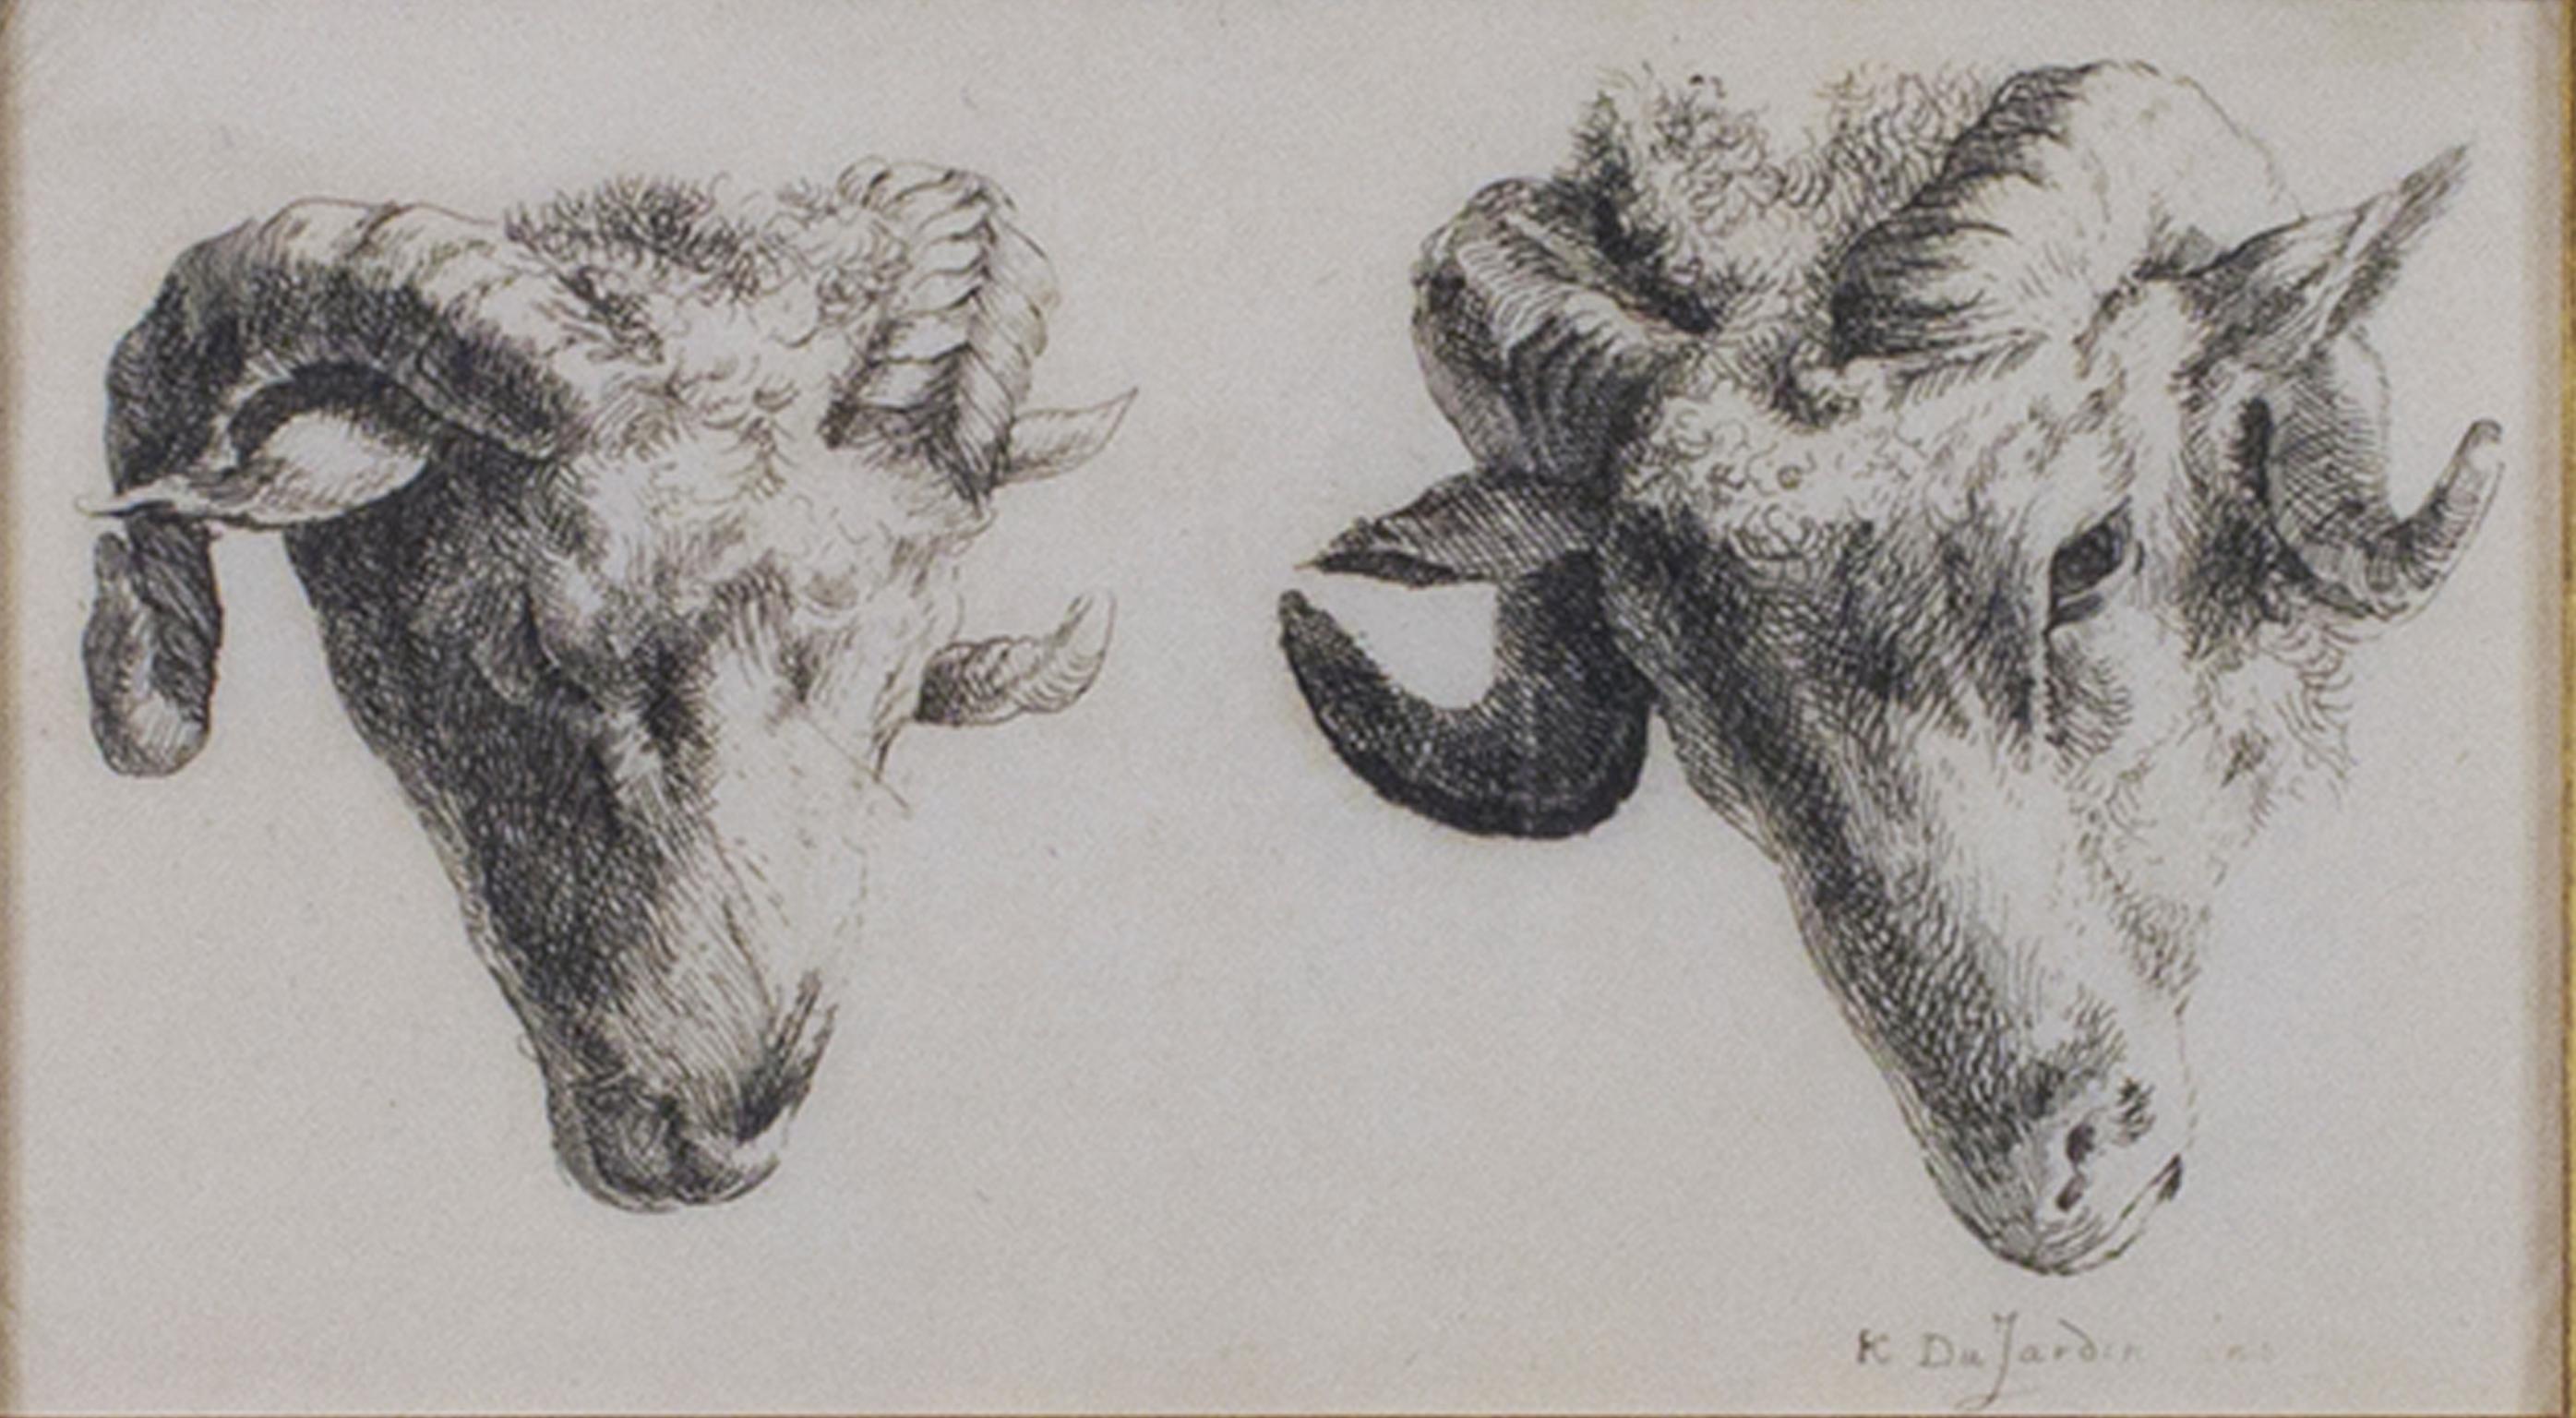 "Two Rams Looking Down, One Quarter View One Straight Ahead," by Karel Dujardin